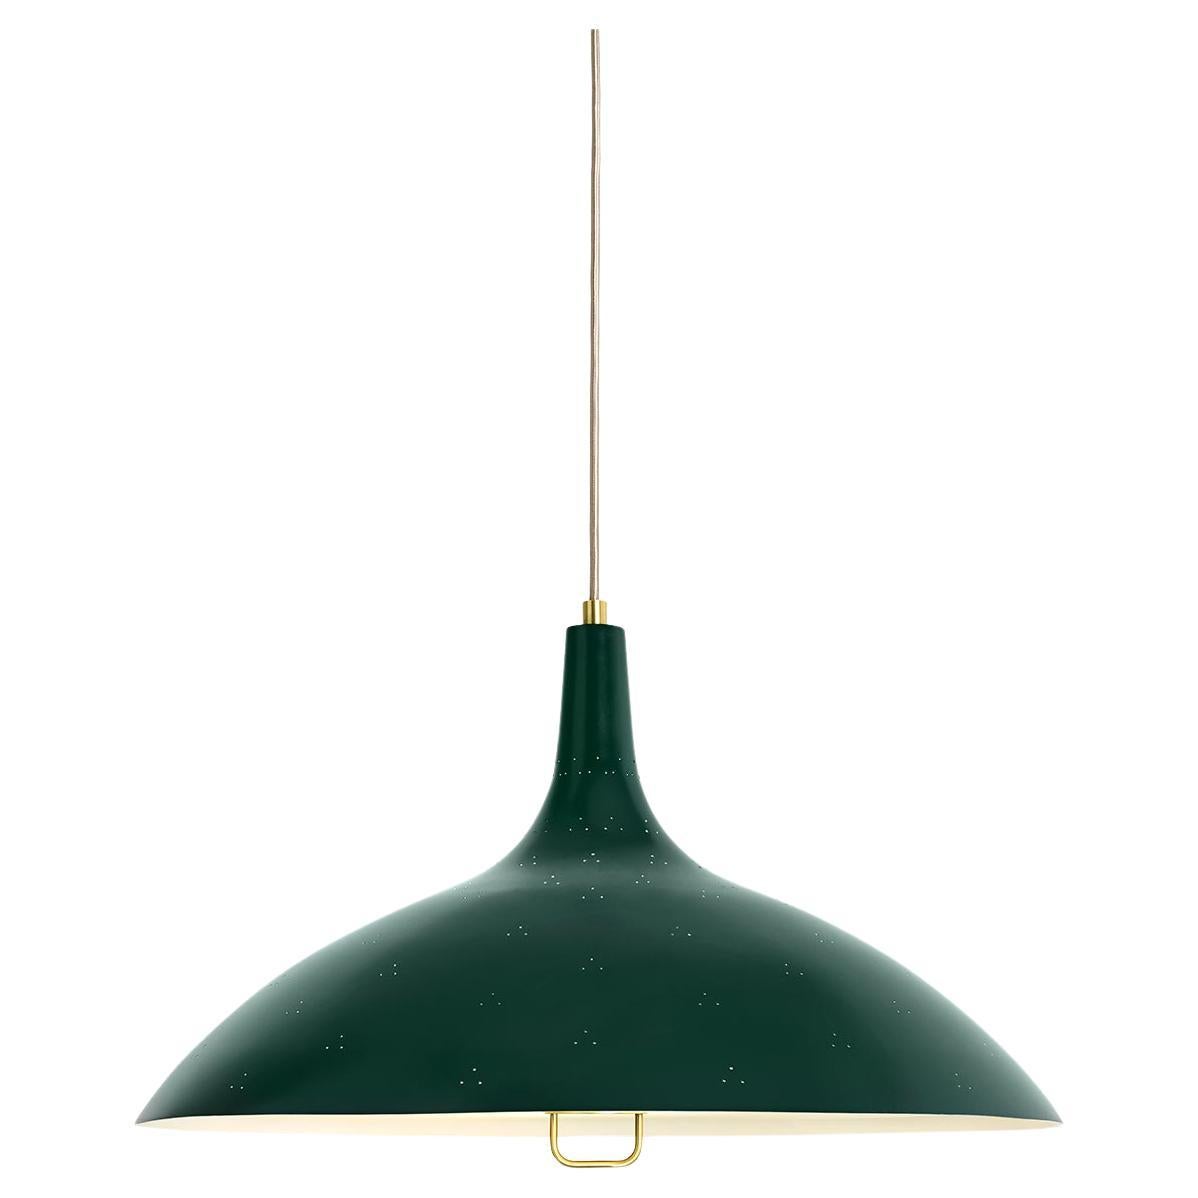 Lampes suspendues Paavo Tynell 1965, vertes